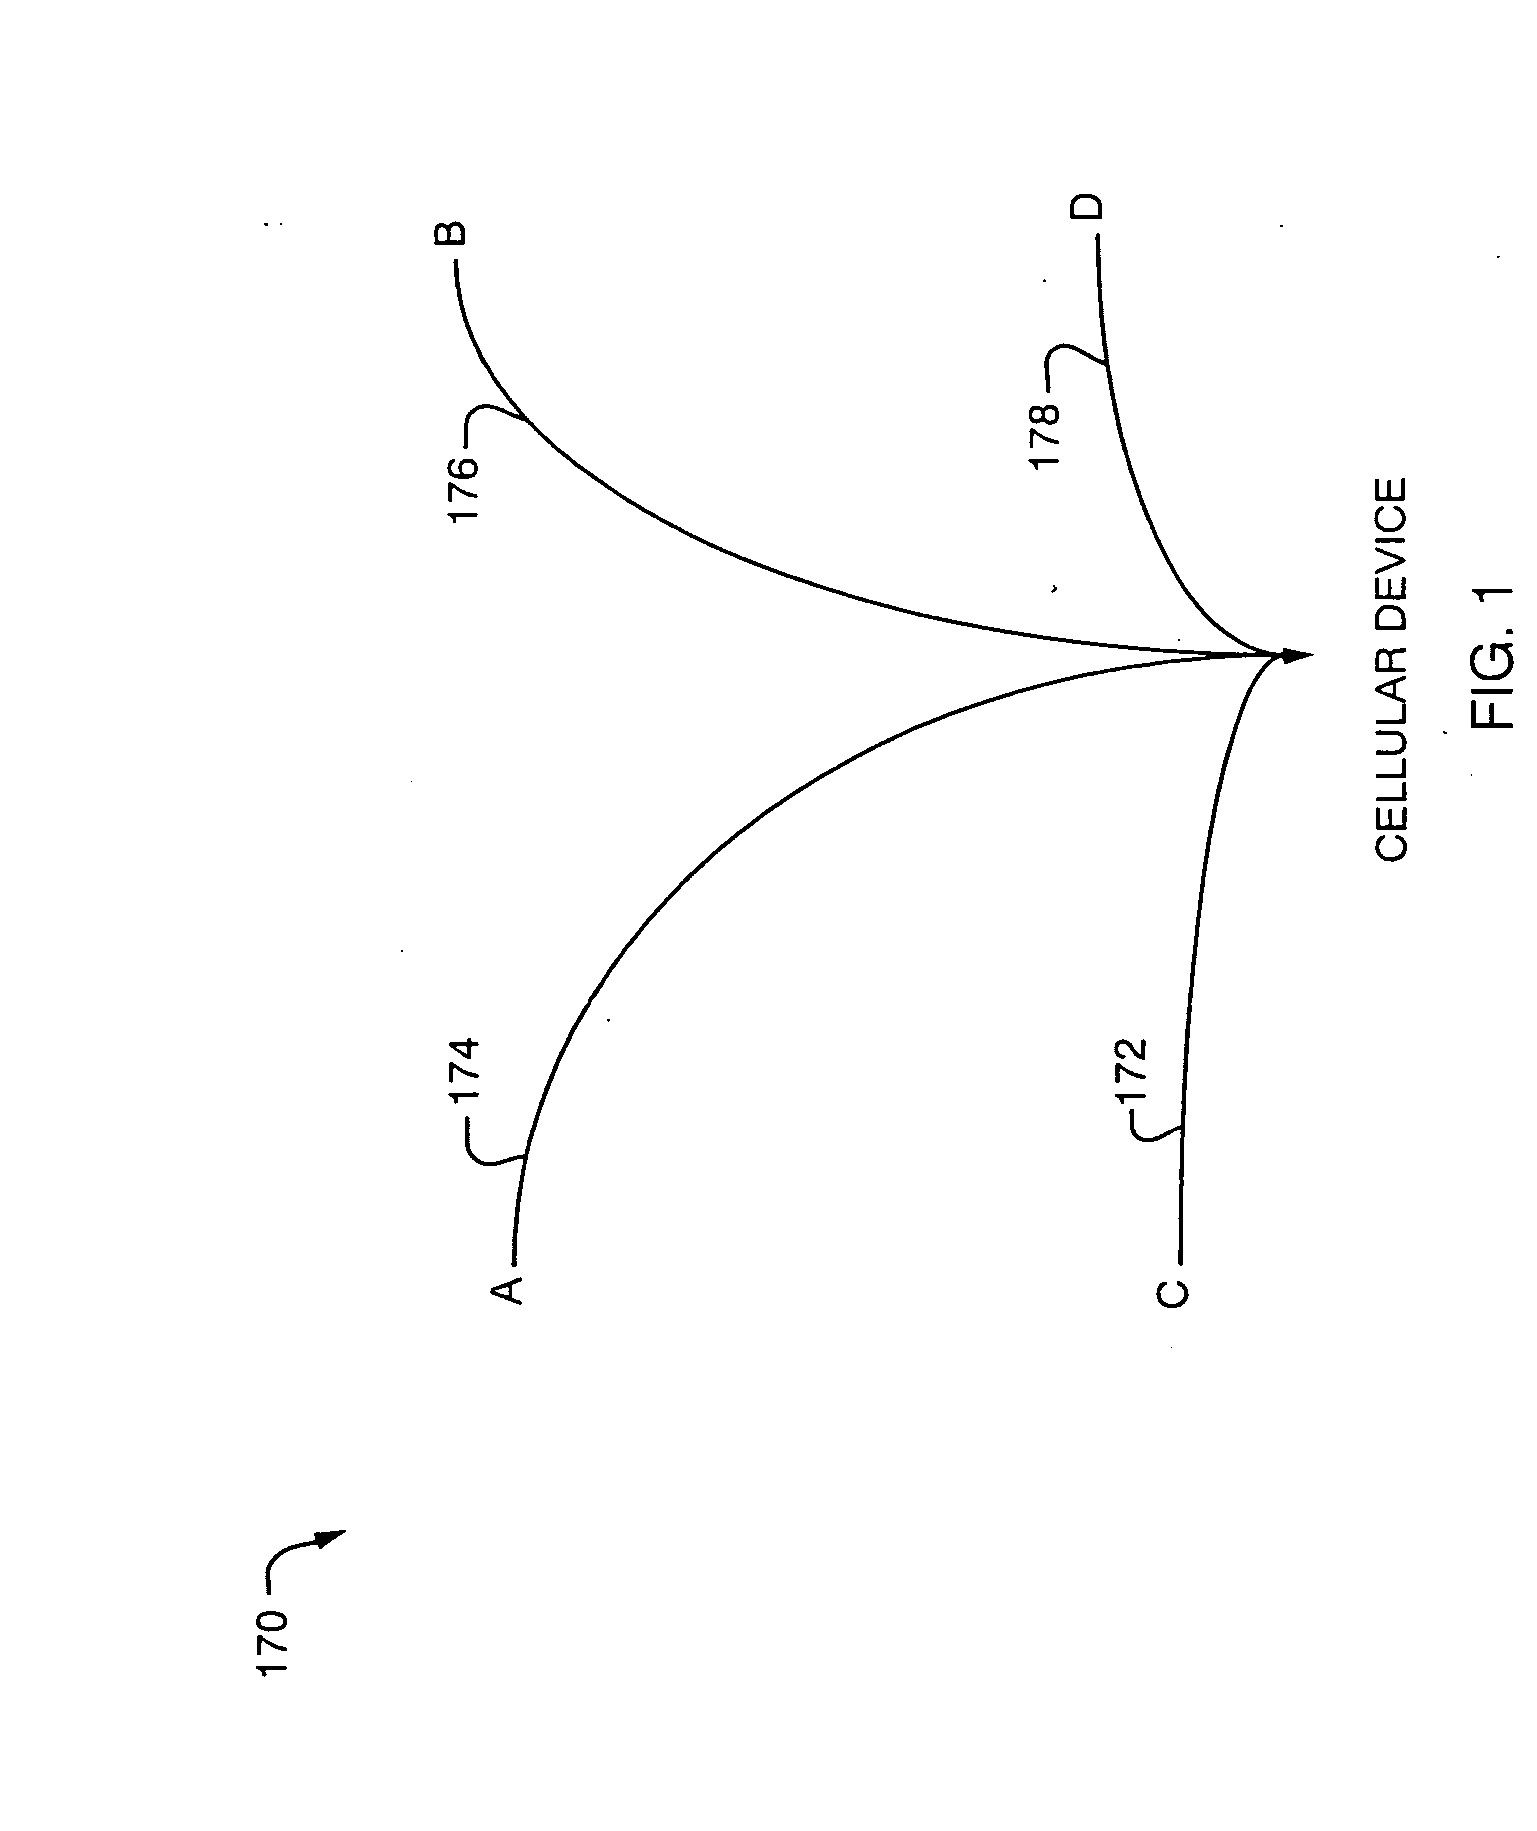 Methods and techniques for penalty-based channel assignments in a cellular network